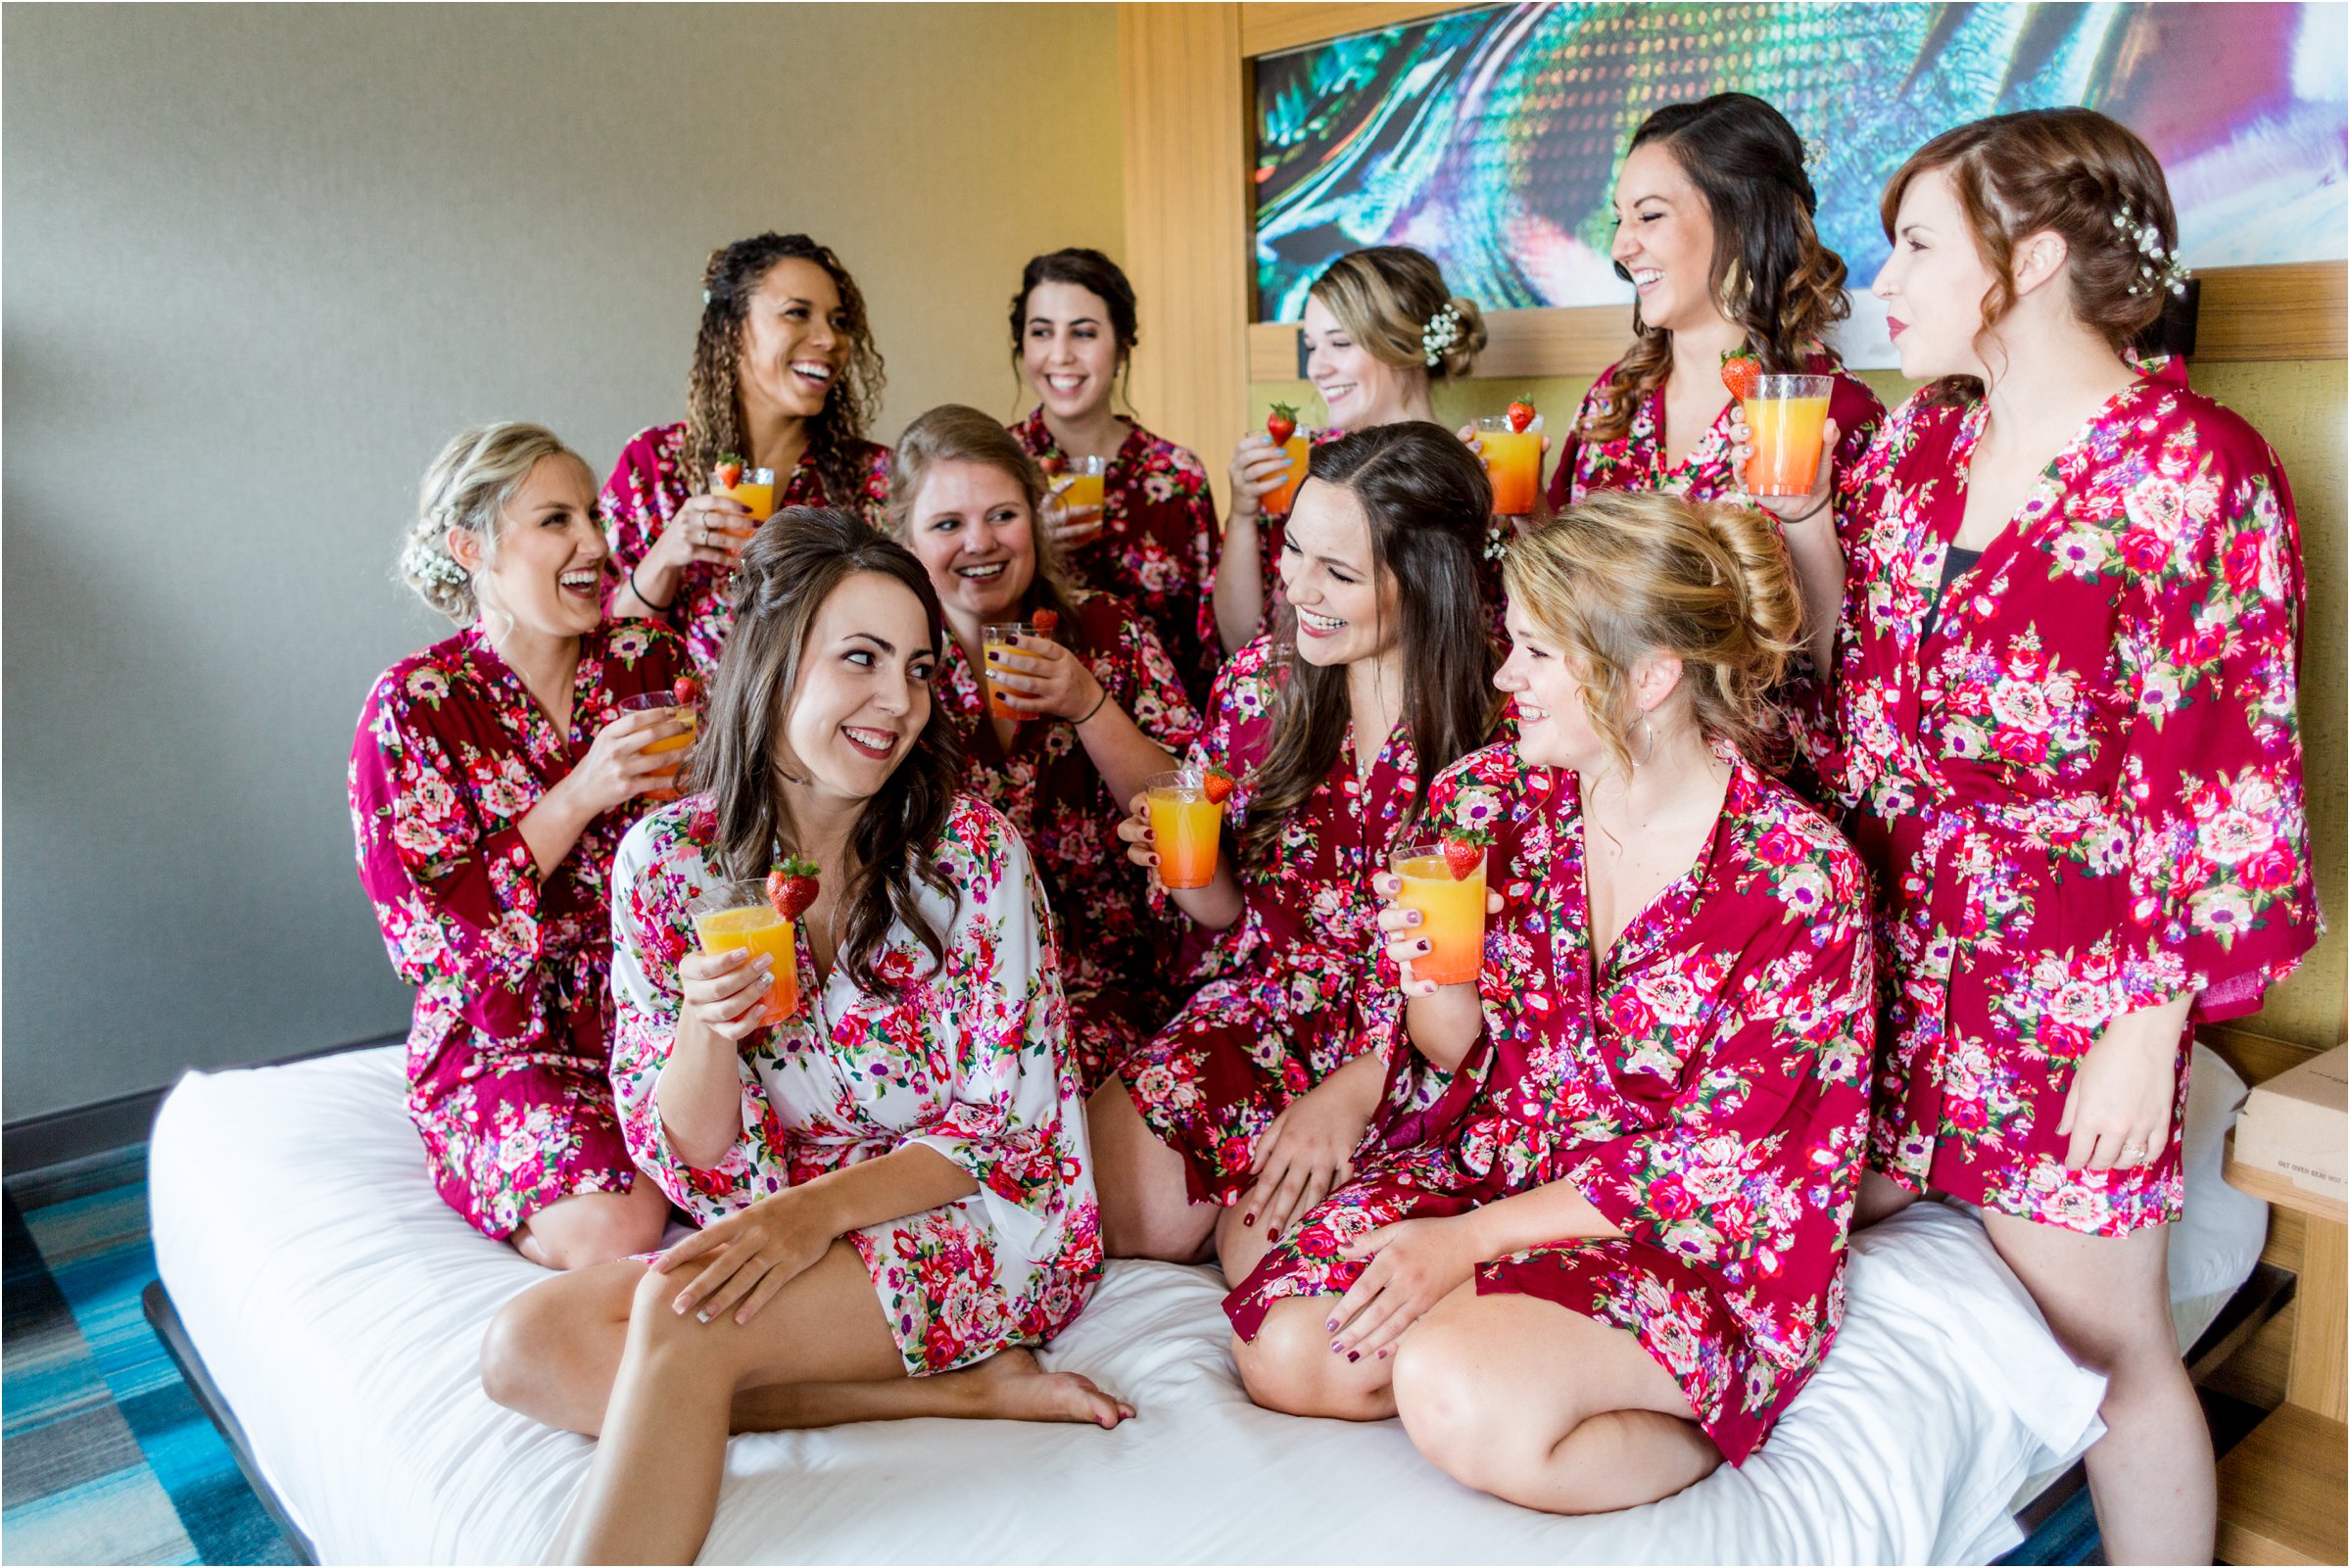 bridesmaids drink mimosas together on hotel bed